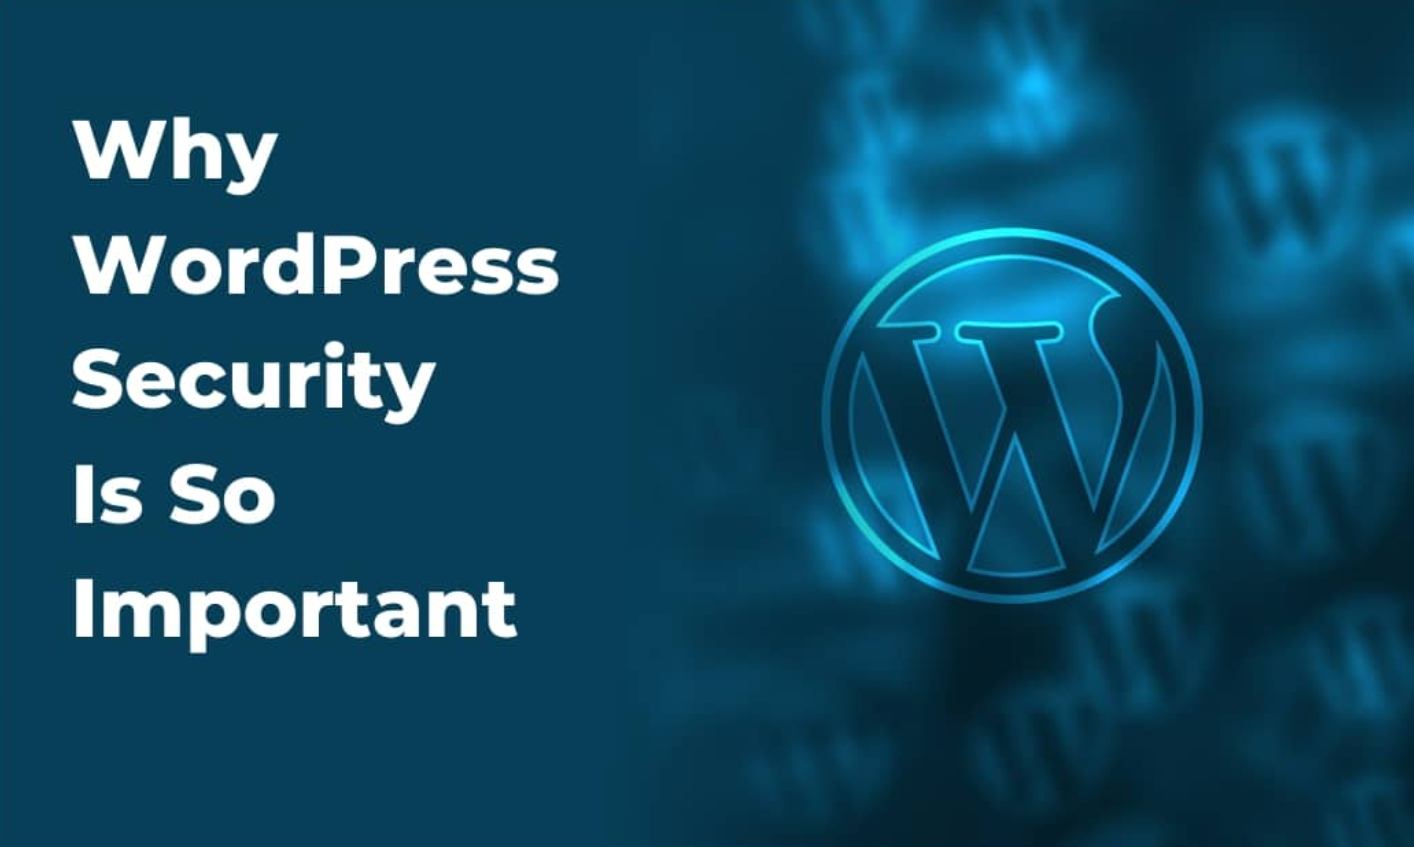 Why WordPress Security Is So Important